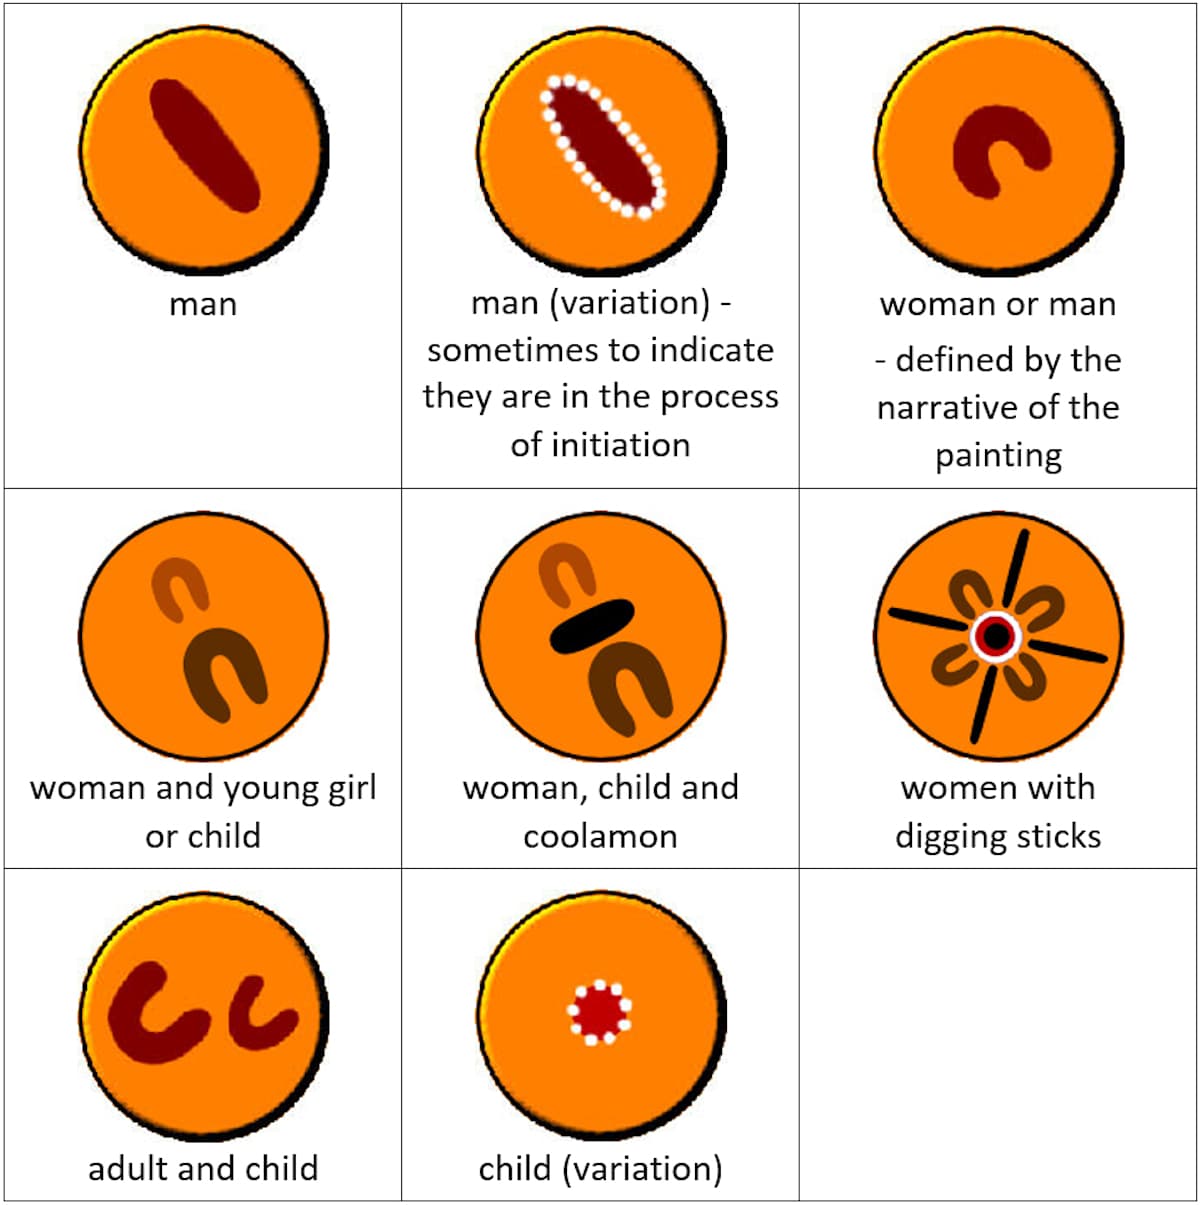 Aboriginal symbols and their meaning